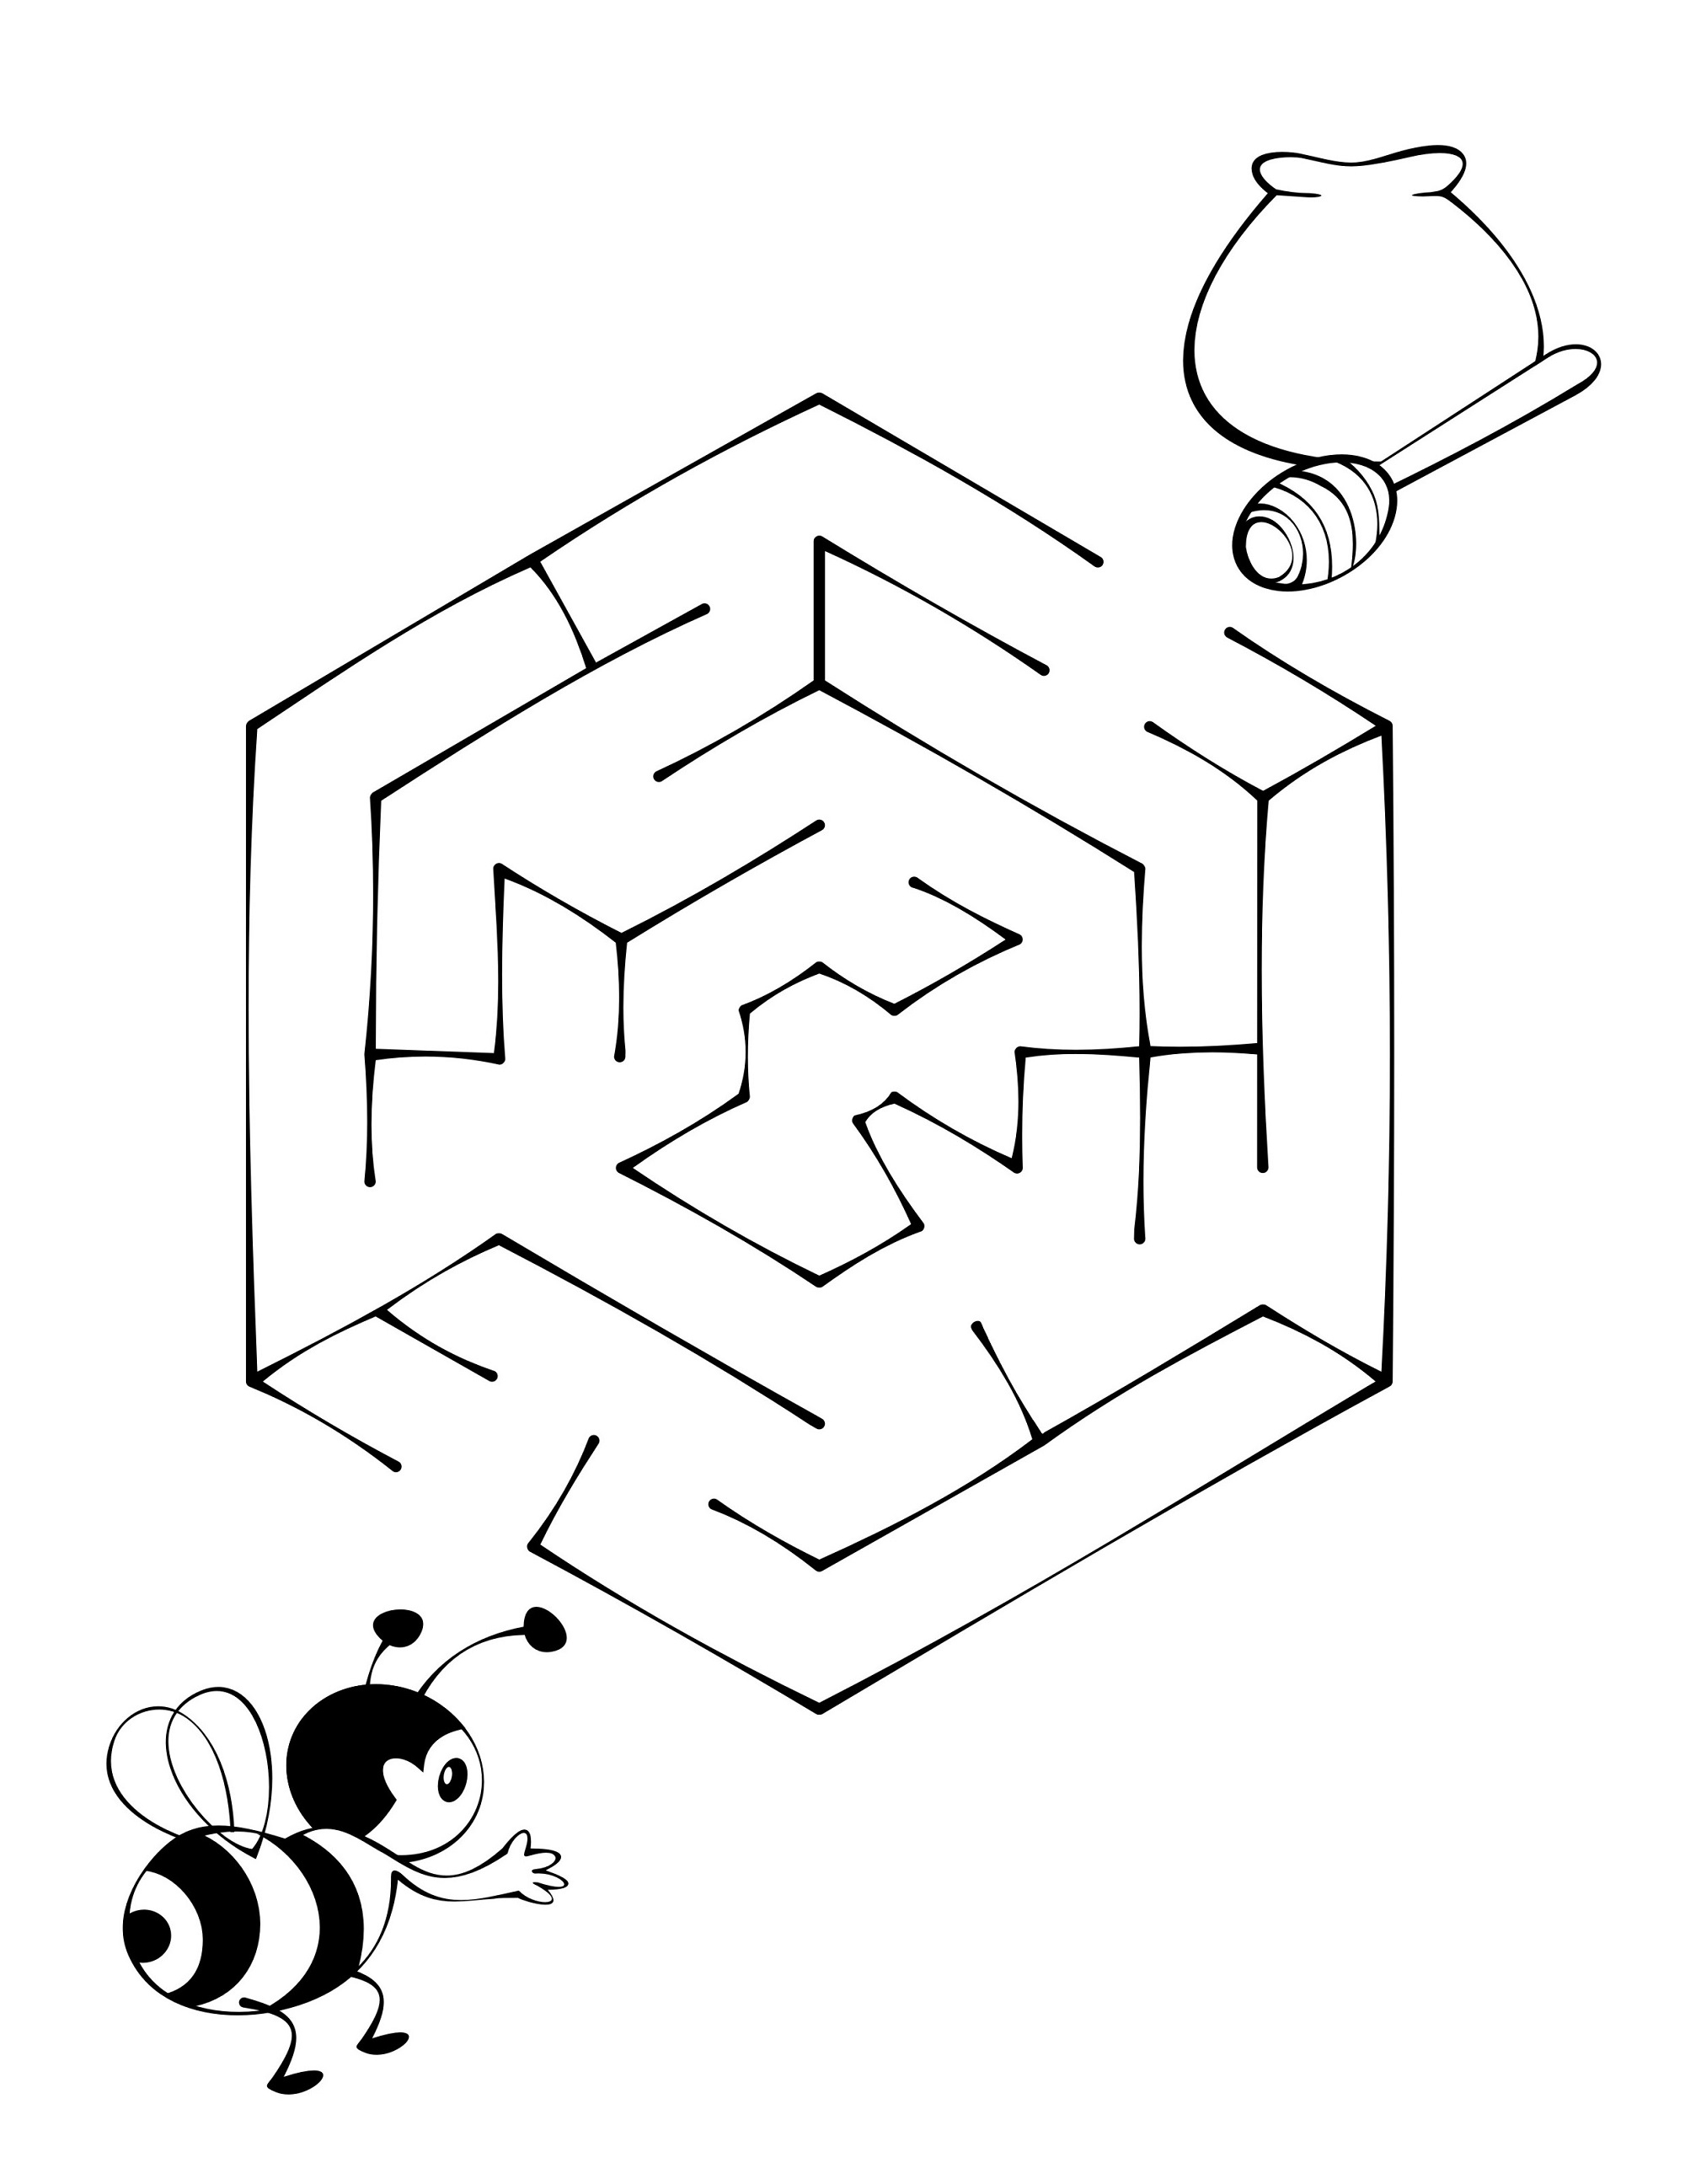 Maze Puzzle For Kids To Print | Kiddo Shelter - Printable Puzzle Mazes